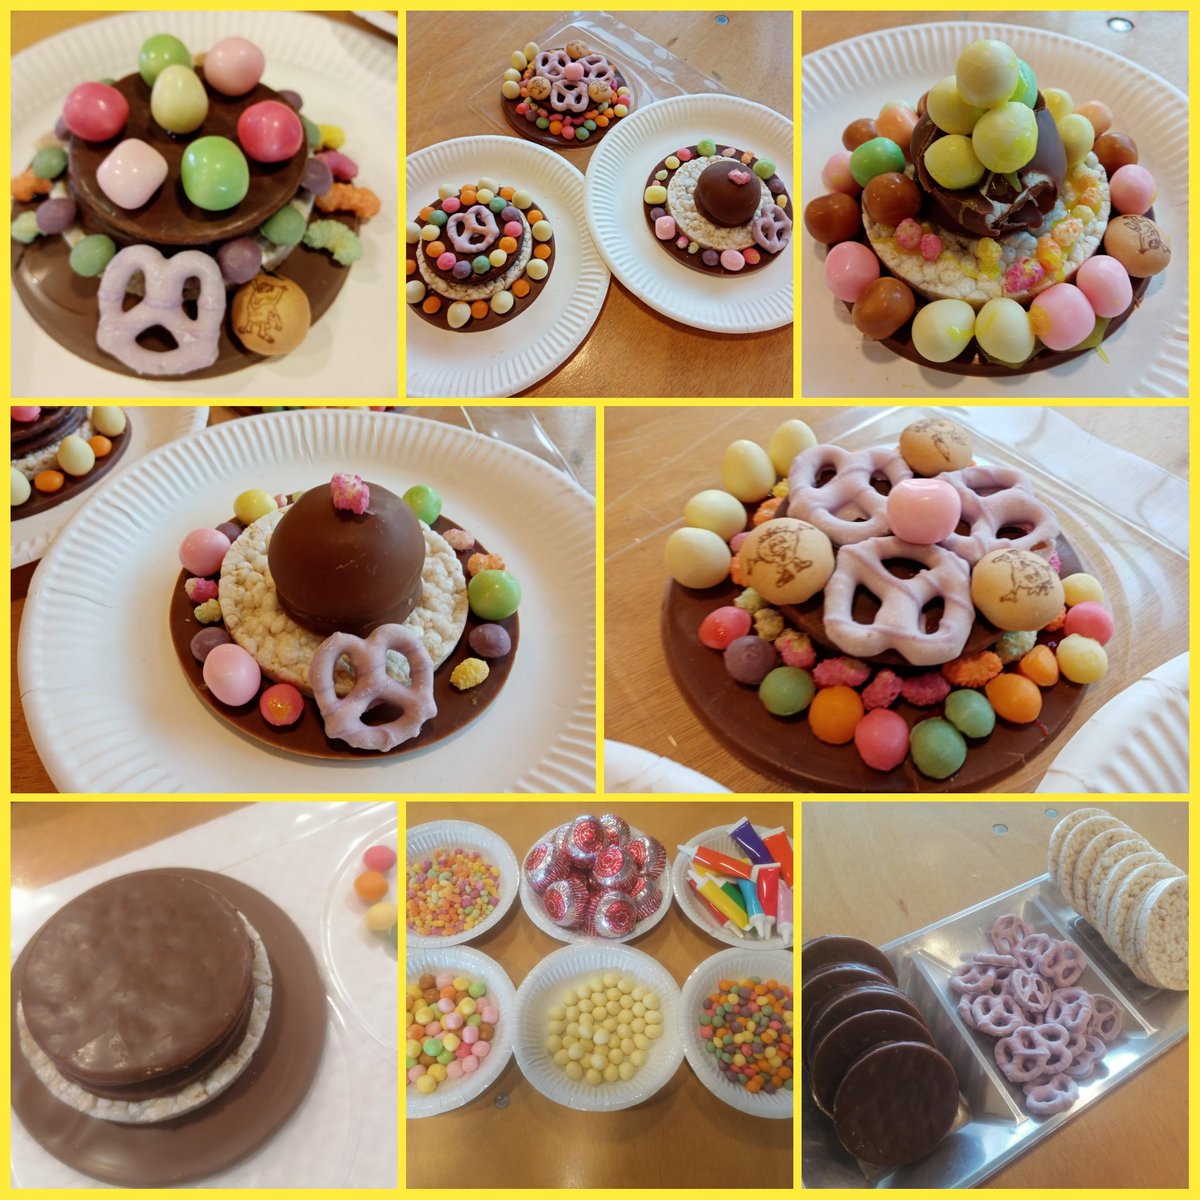 The Easter 🐣 crafts continue! This time we upped our A-game and brought food 🍪into our arts and crafts! Check out these amazing 🍫 Candy 🍬 Easter Bonnets!!! How yummy do they look! 😋#arts #artsandcrafts #artsy #craft #crafts #craftersofinstagram #crafting #craftsofinstagram